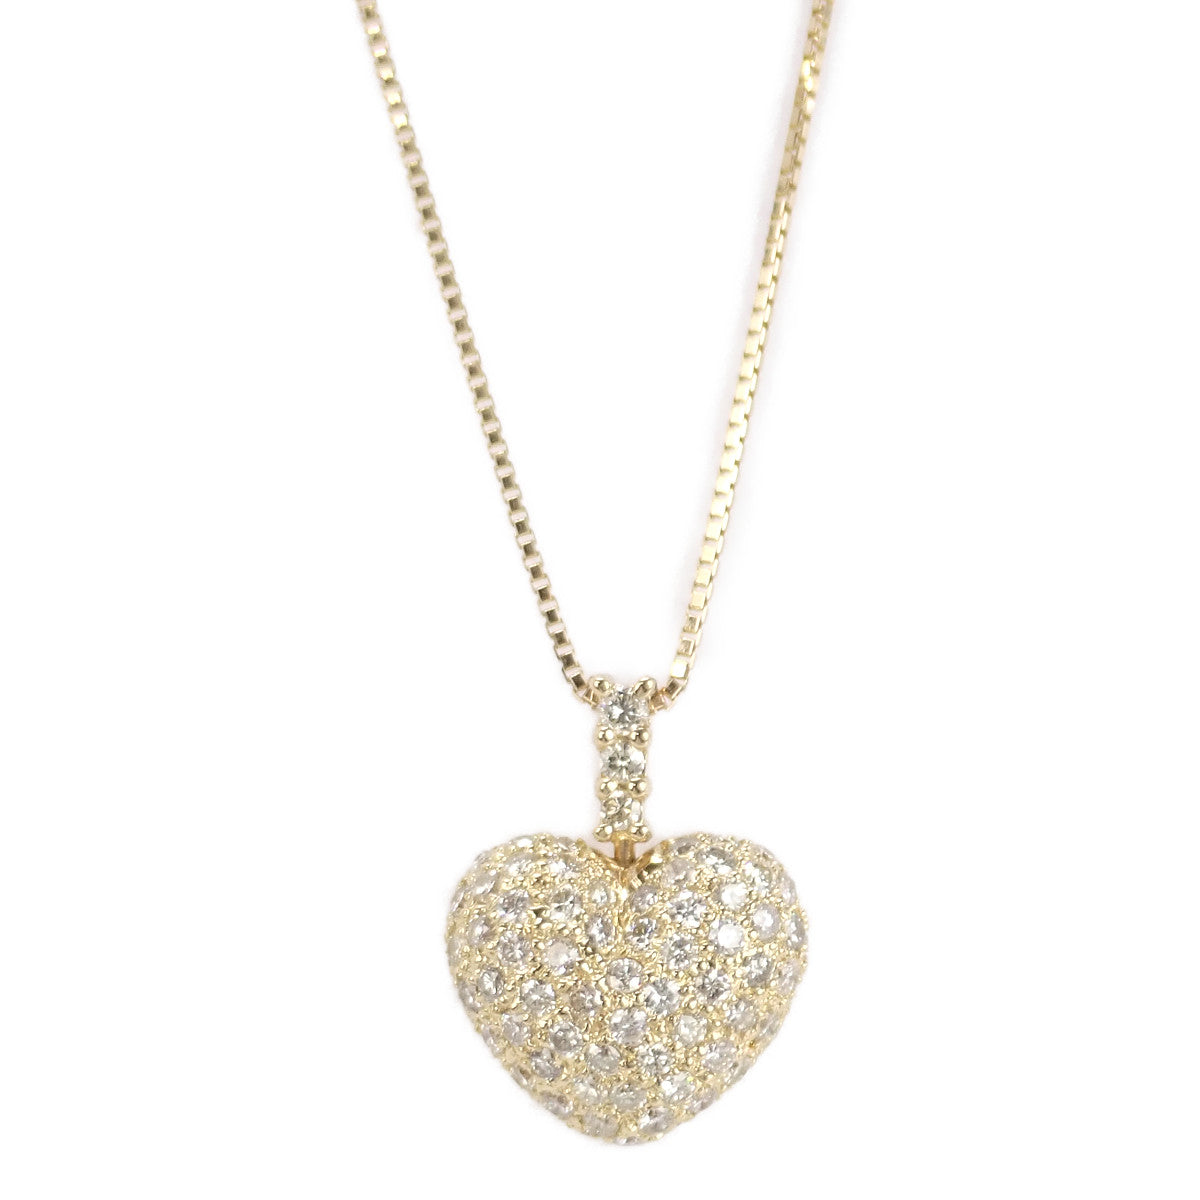 LuxUness  Designer Jewelry Heart Necklace in K18 Yellow Gold with Diamond 1.09ct for Ladies - Gold in Excellent condition